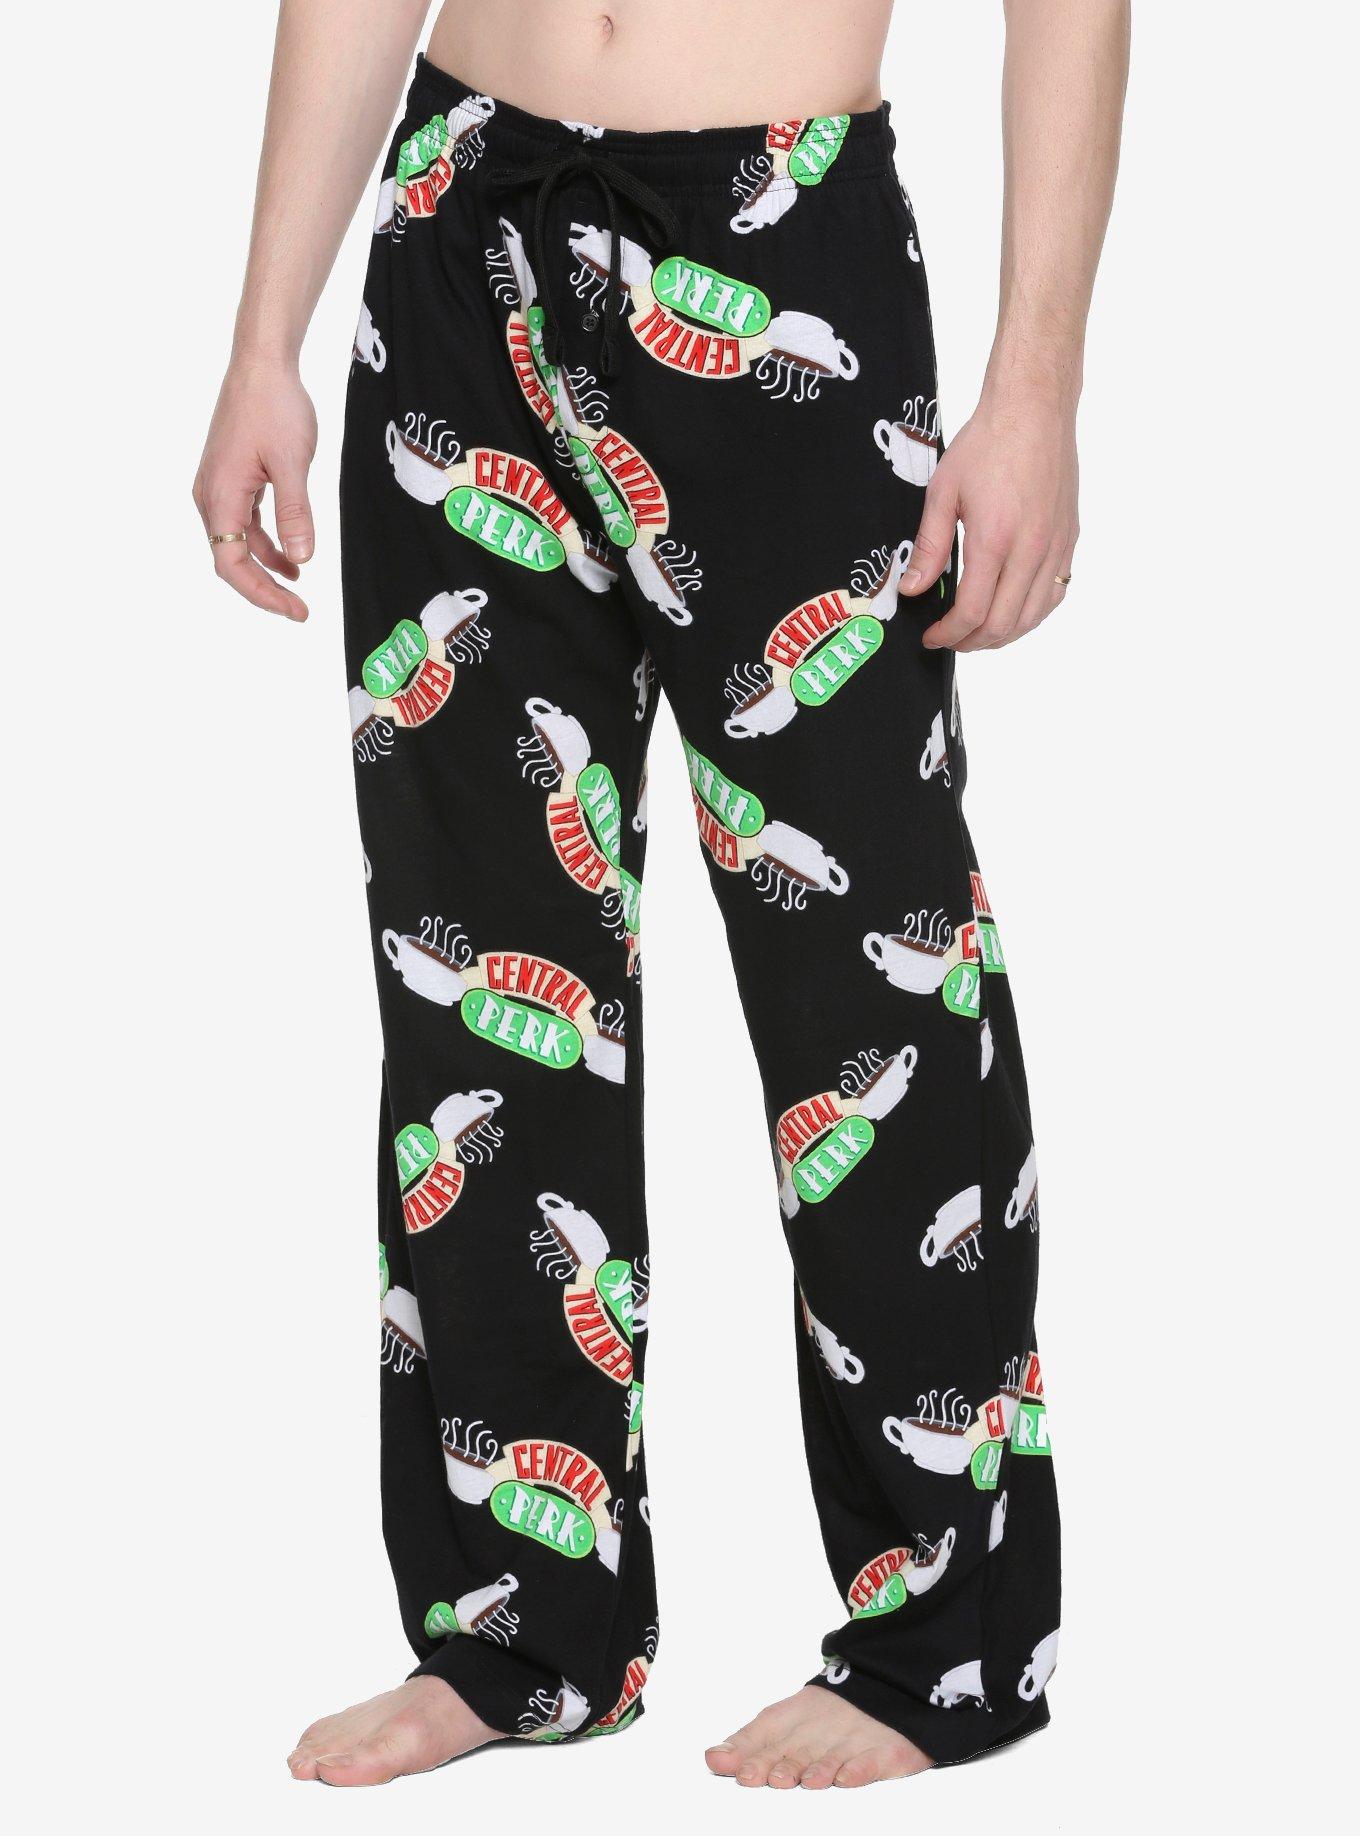 Friends Central Perk Sleep Pants - BoxLunch Exclusive, BLACK, hi-res